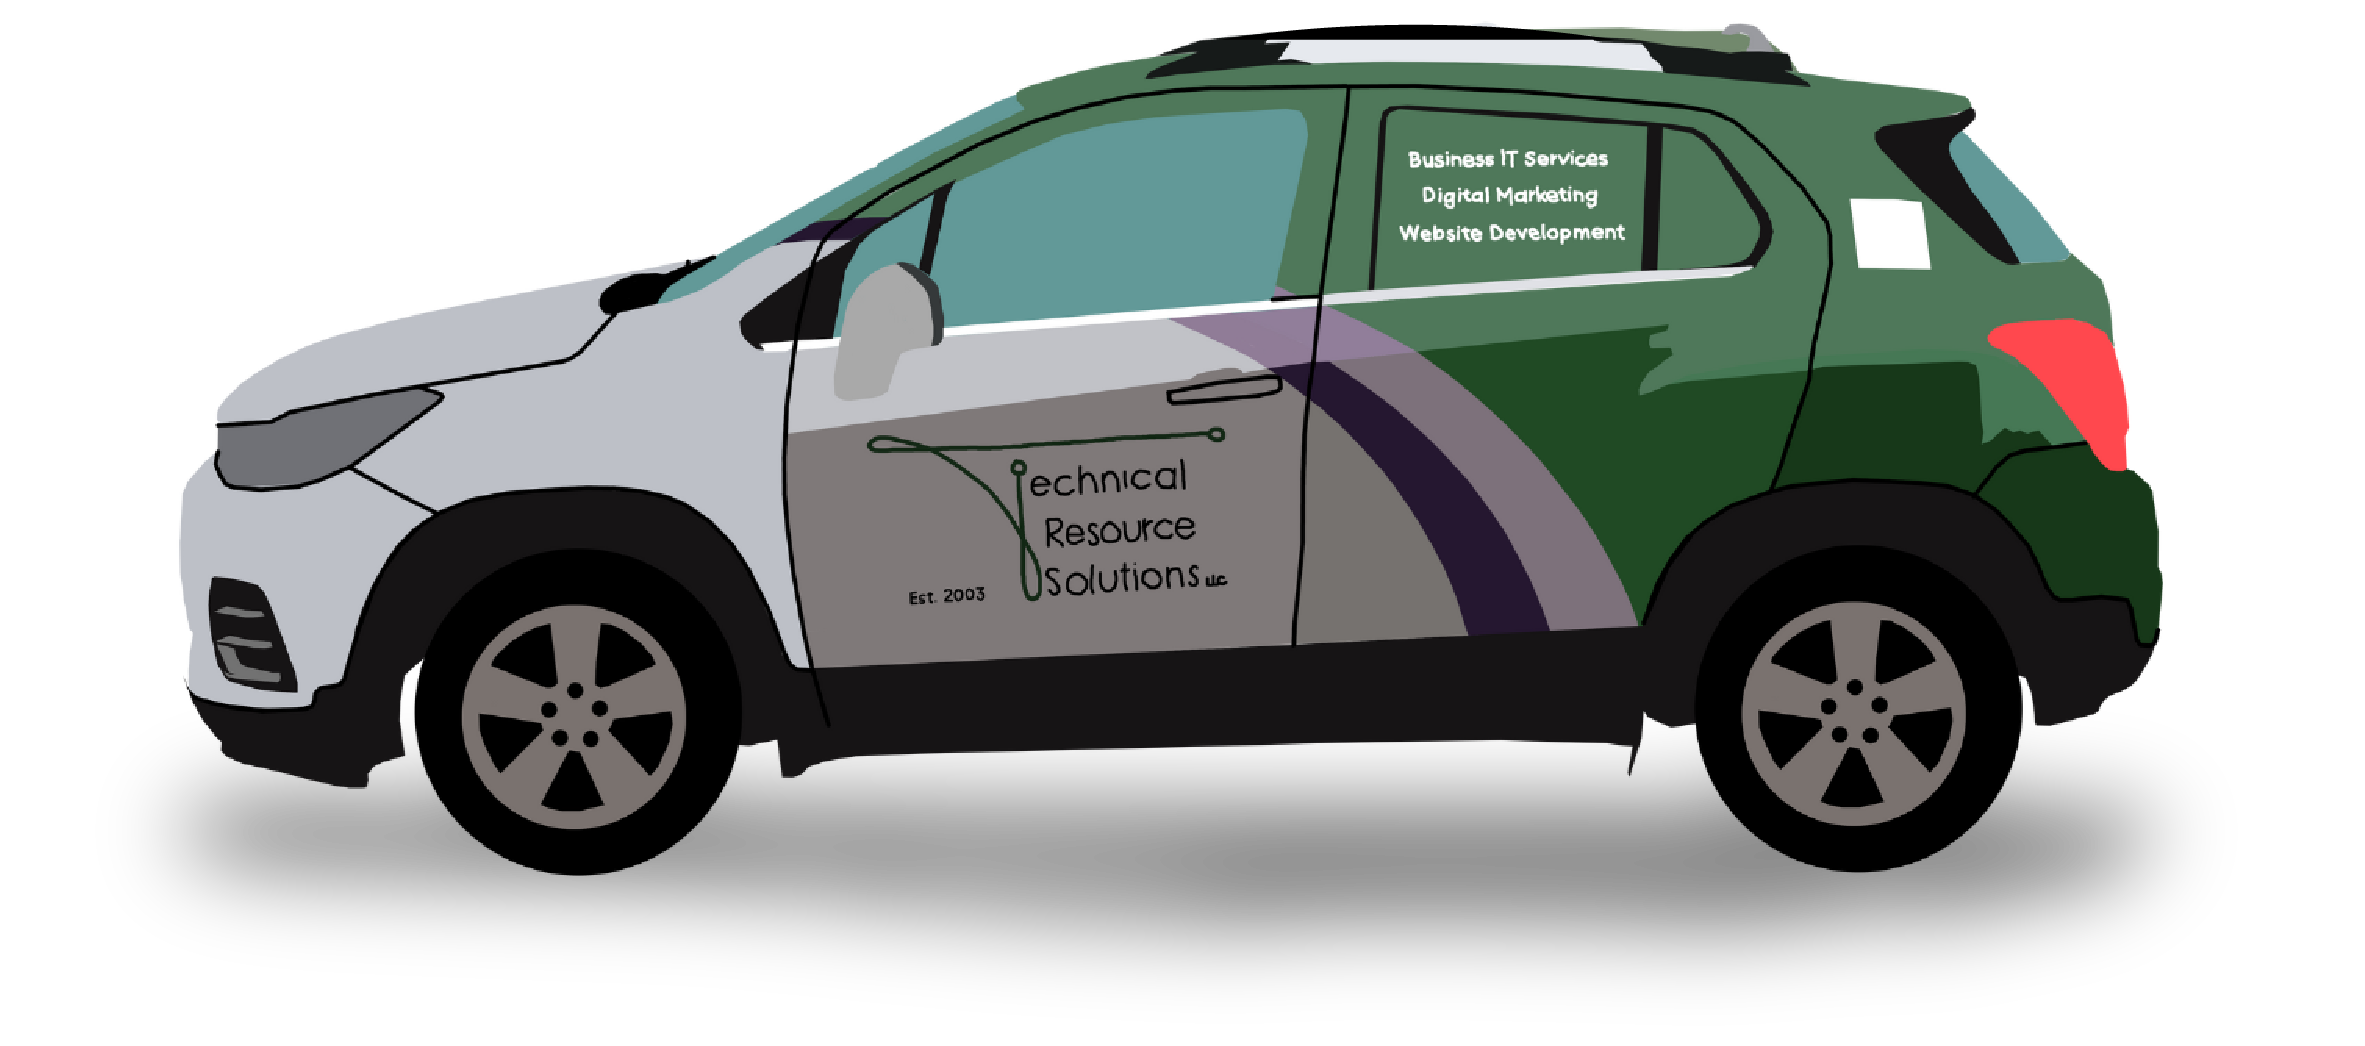 tiny car design with technical resource solutions logo on it